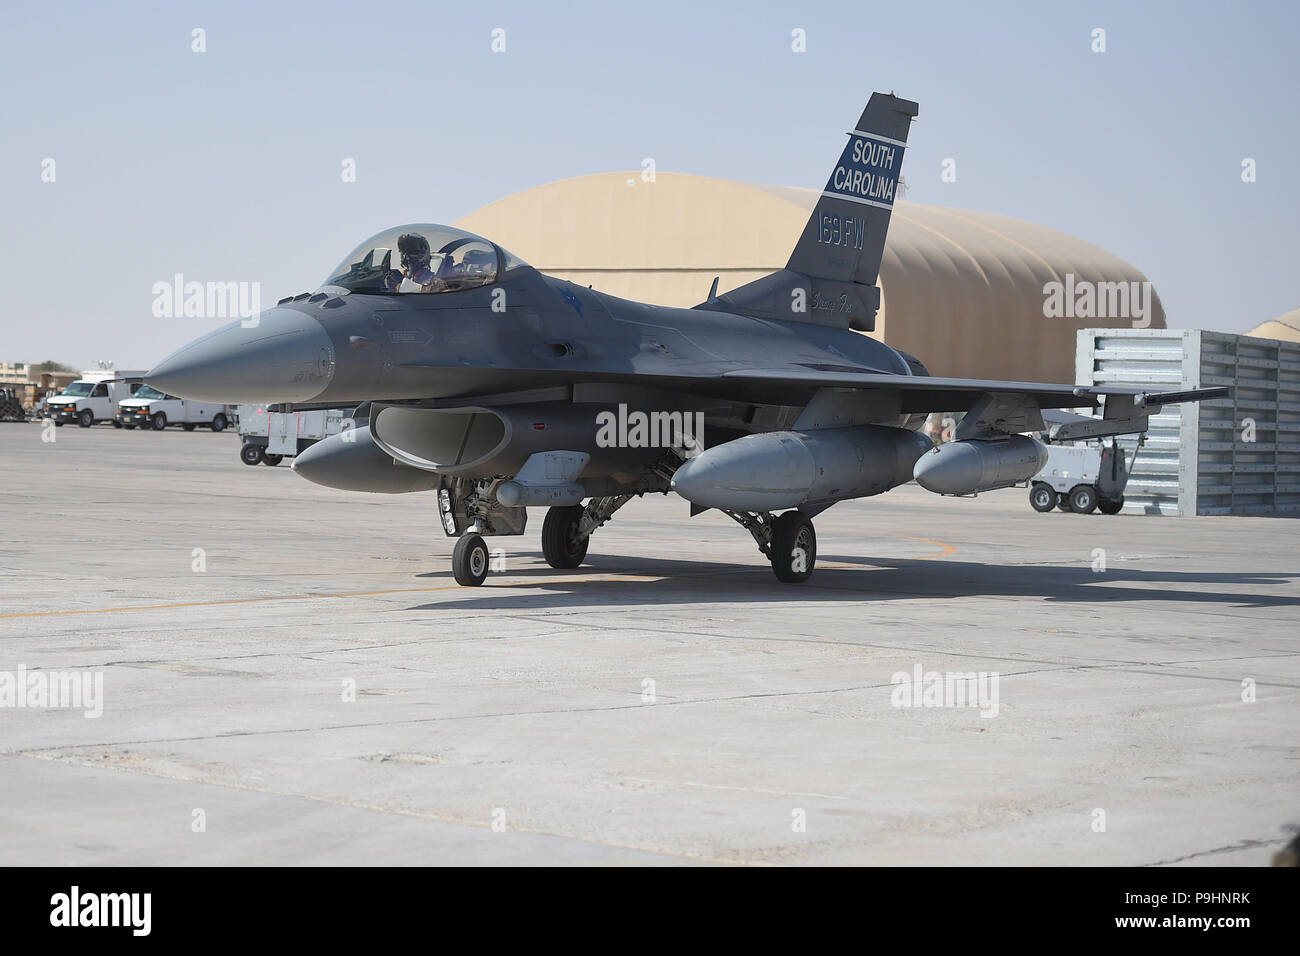 A pilot from the 157th Expeditionary Fighter Squadron prepares to park an F-16 Fighting Falcon, July 16, 2018, at an undisclosed location in Southwest Asia. More than 300 Airmen from the 169th Fighter Wing of the South Carolina Air National Guard recently deployed to the 407th Air Expeditionary Group in support of Operation Inherent Resolve. (U.S. Air Force photo by Staff Sgt. Dana J. Cable) Stock Photo